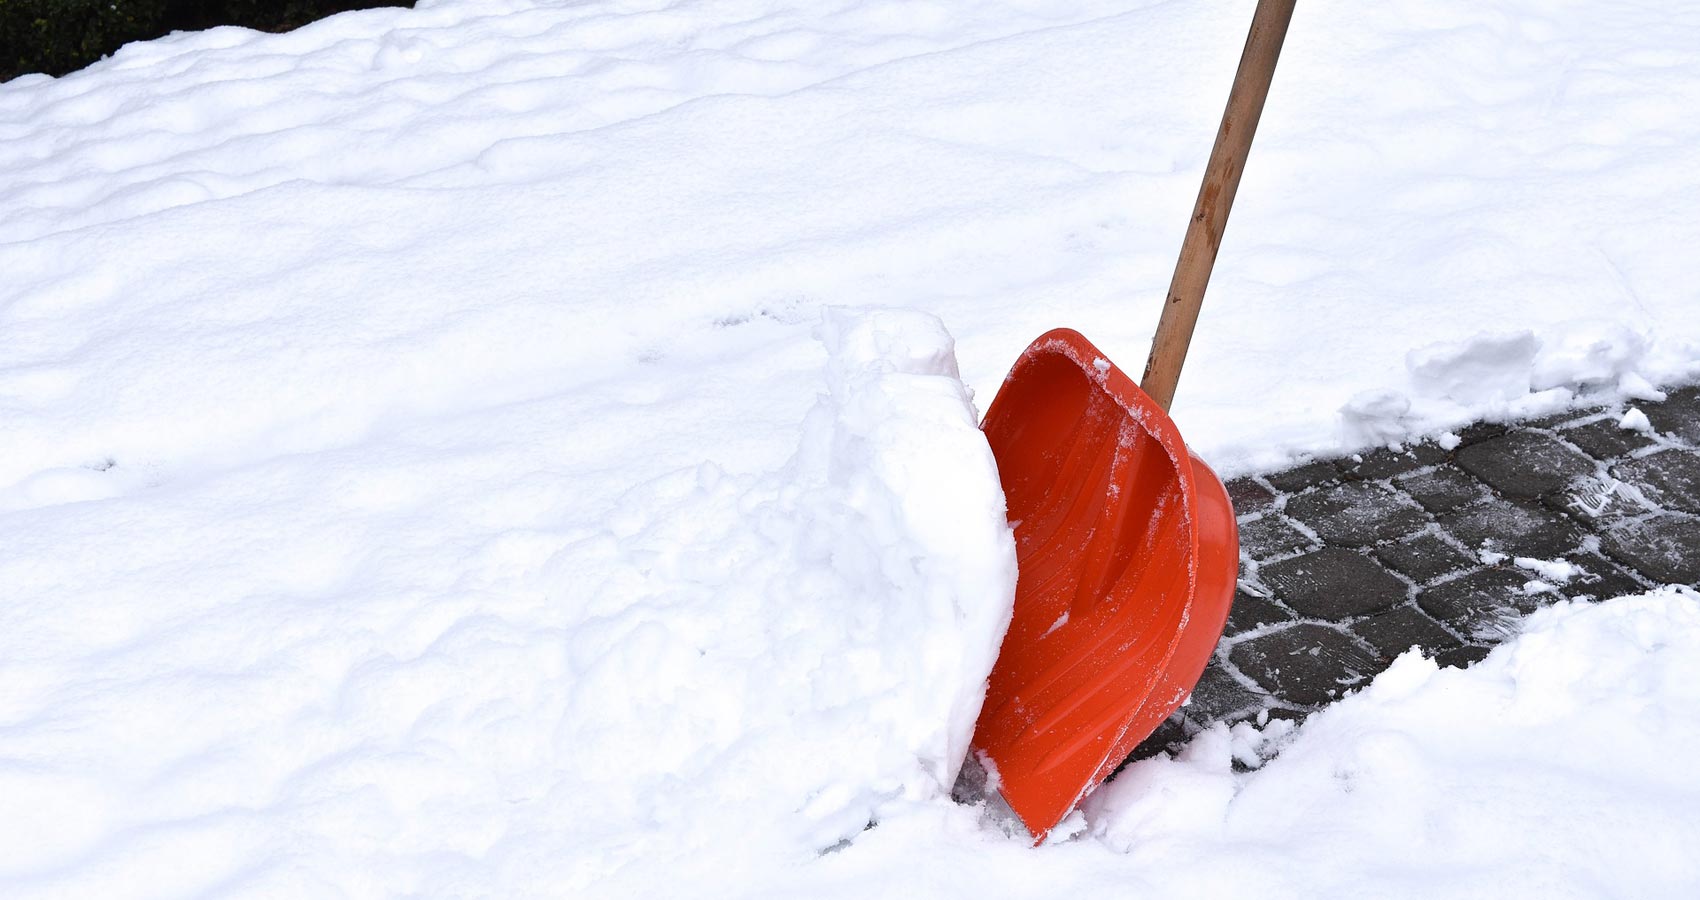 The Boy Who Never Wanted To Shovel Snow, story by David C Russell at Spillwords.com